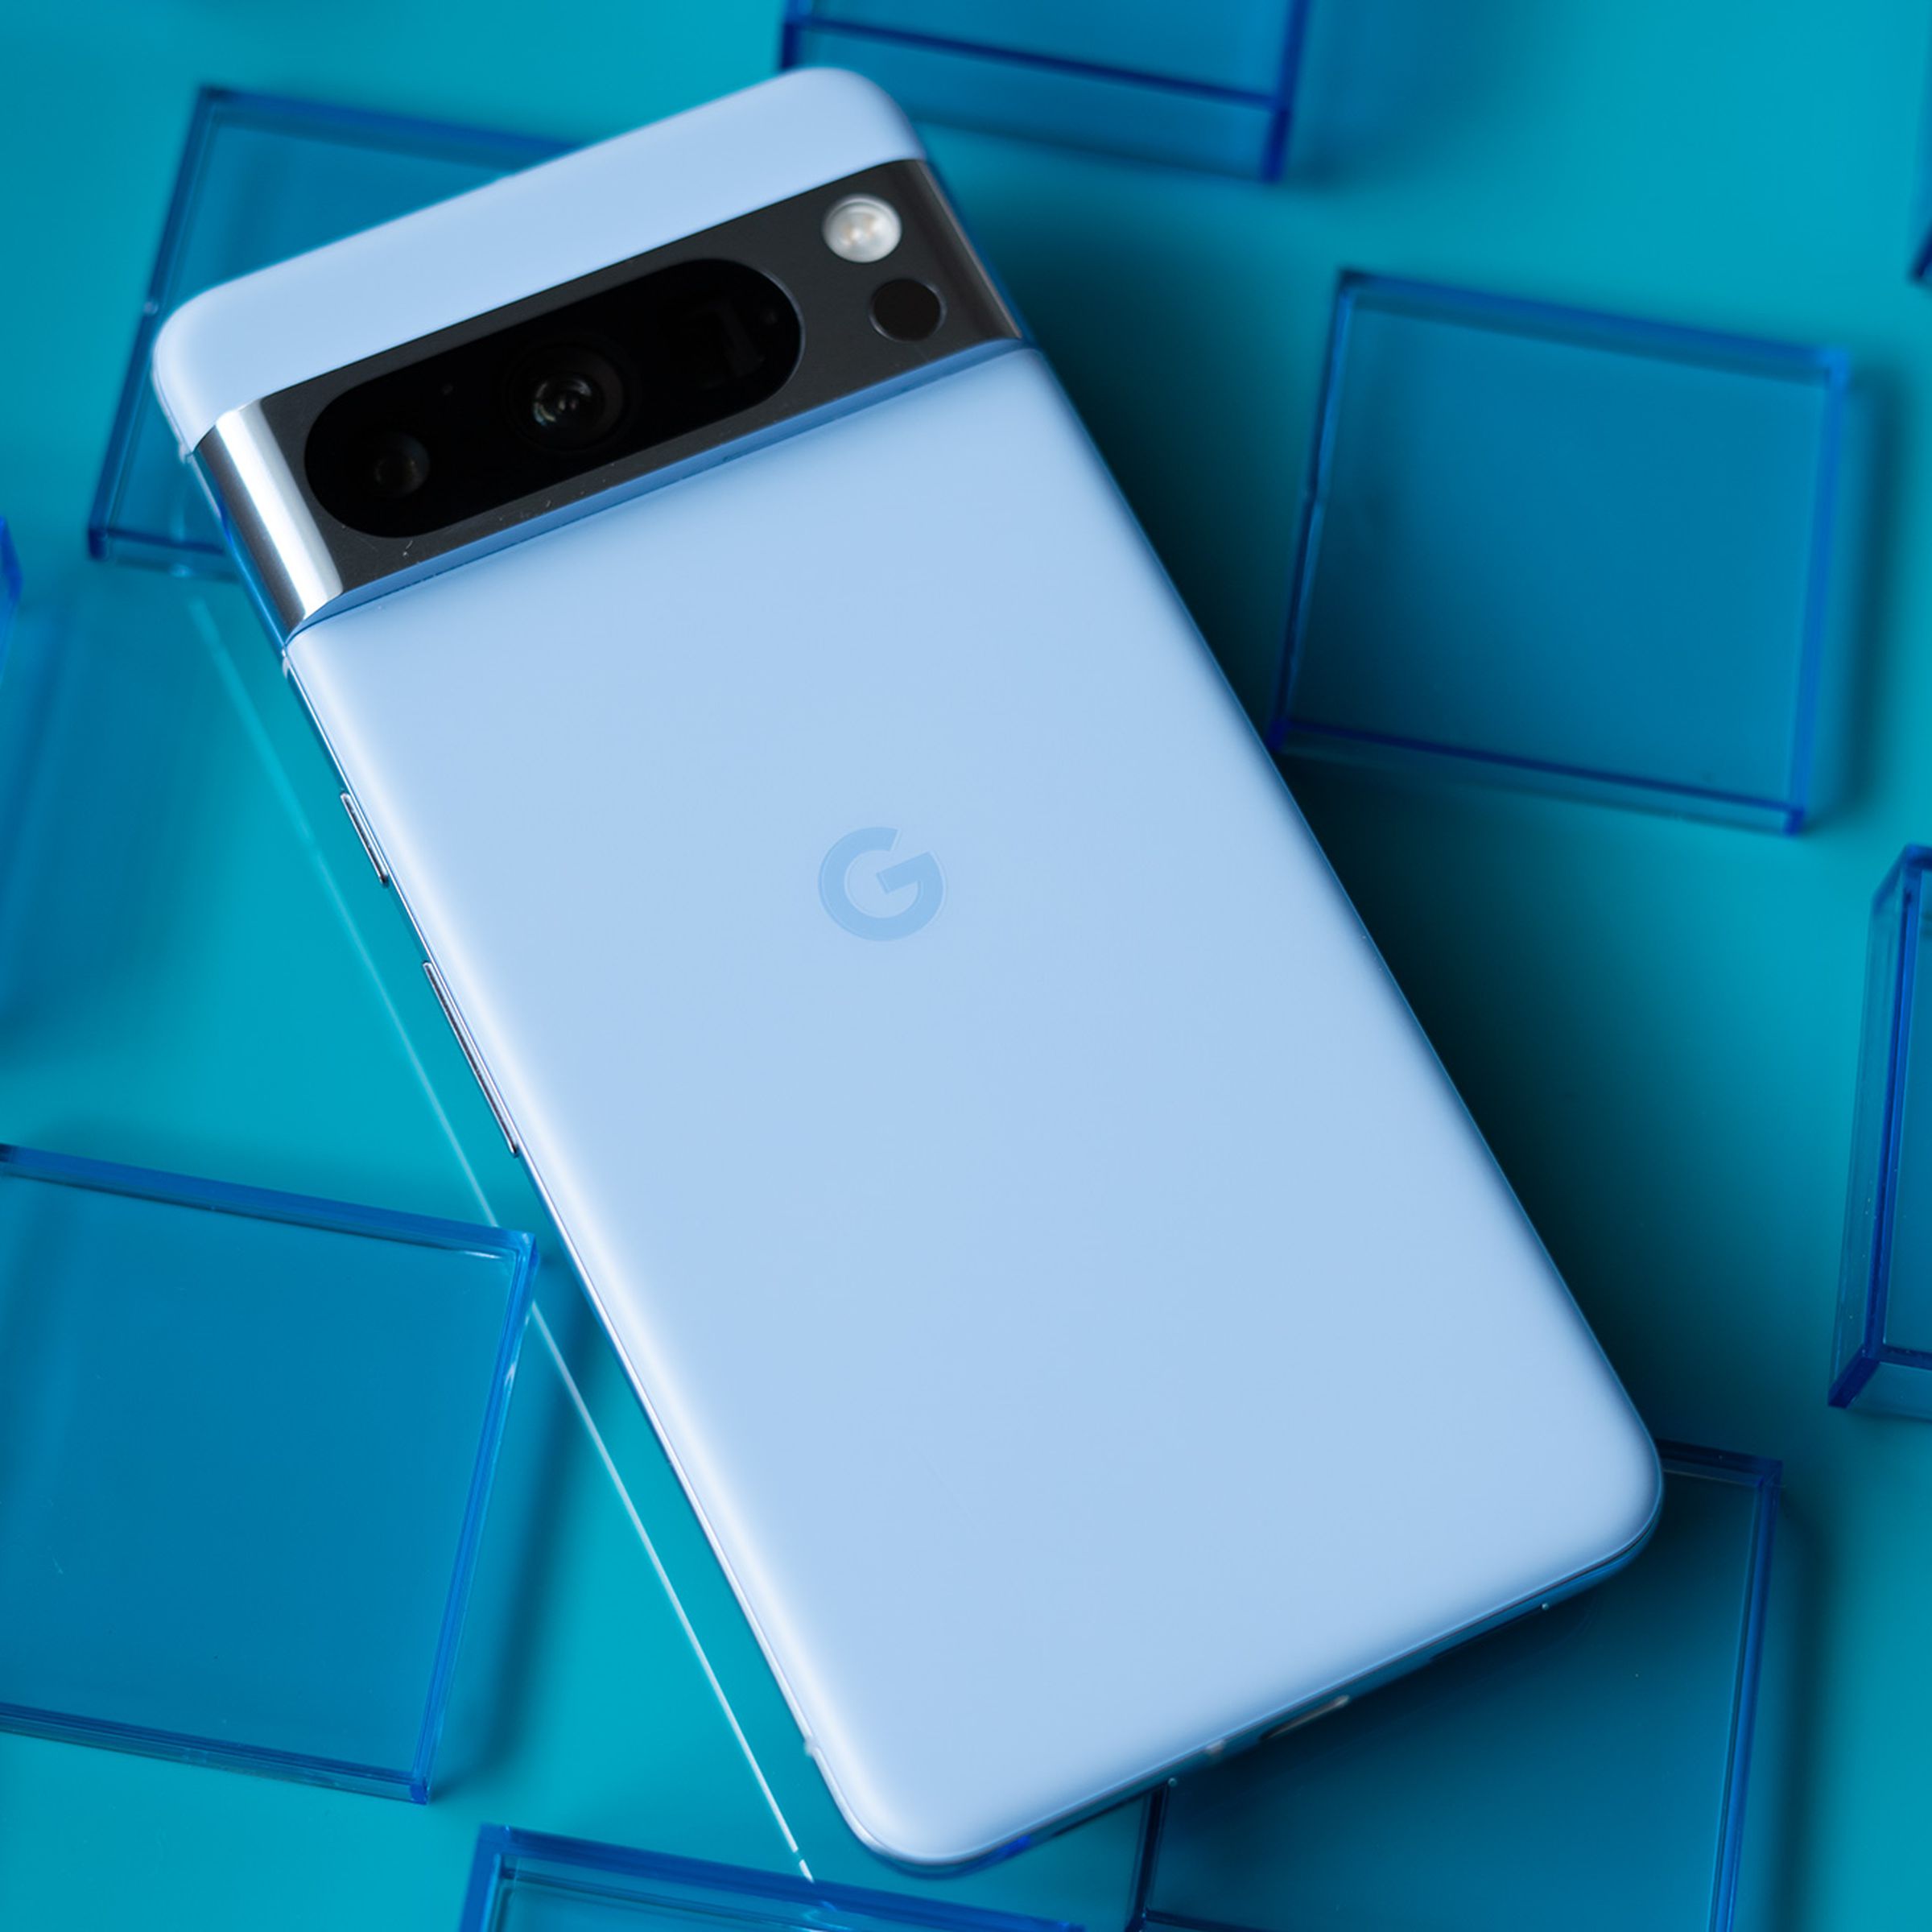 Google Pixel 8 Pro in bay blue showing back panel on a teal blue background surrounded by transparent blue squares